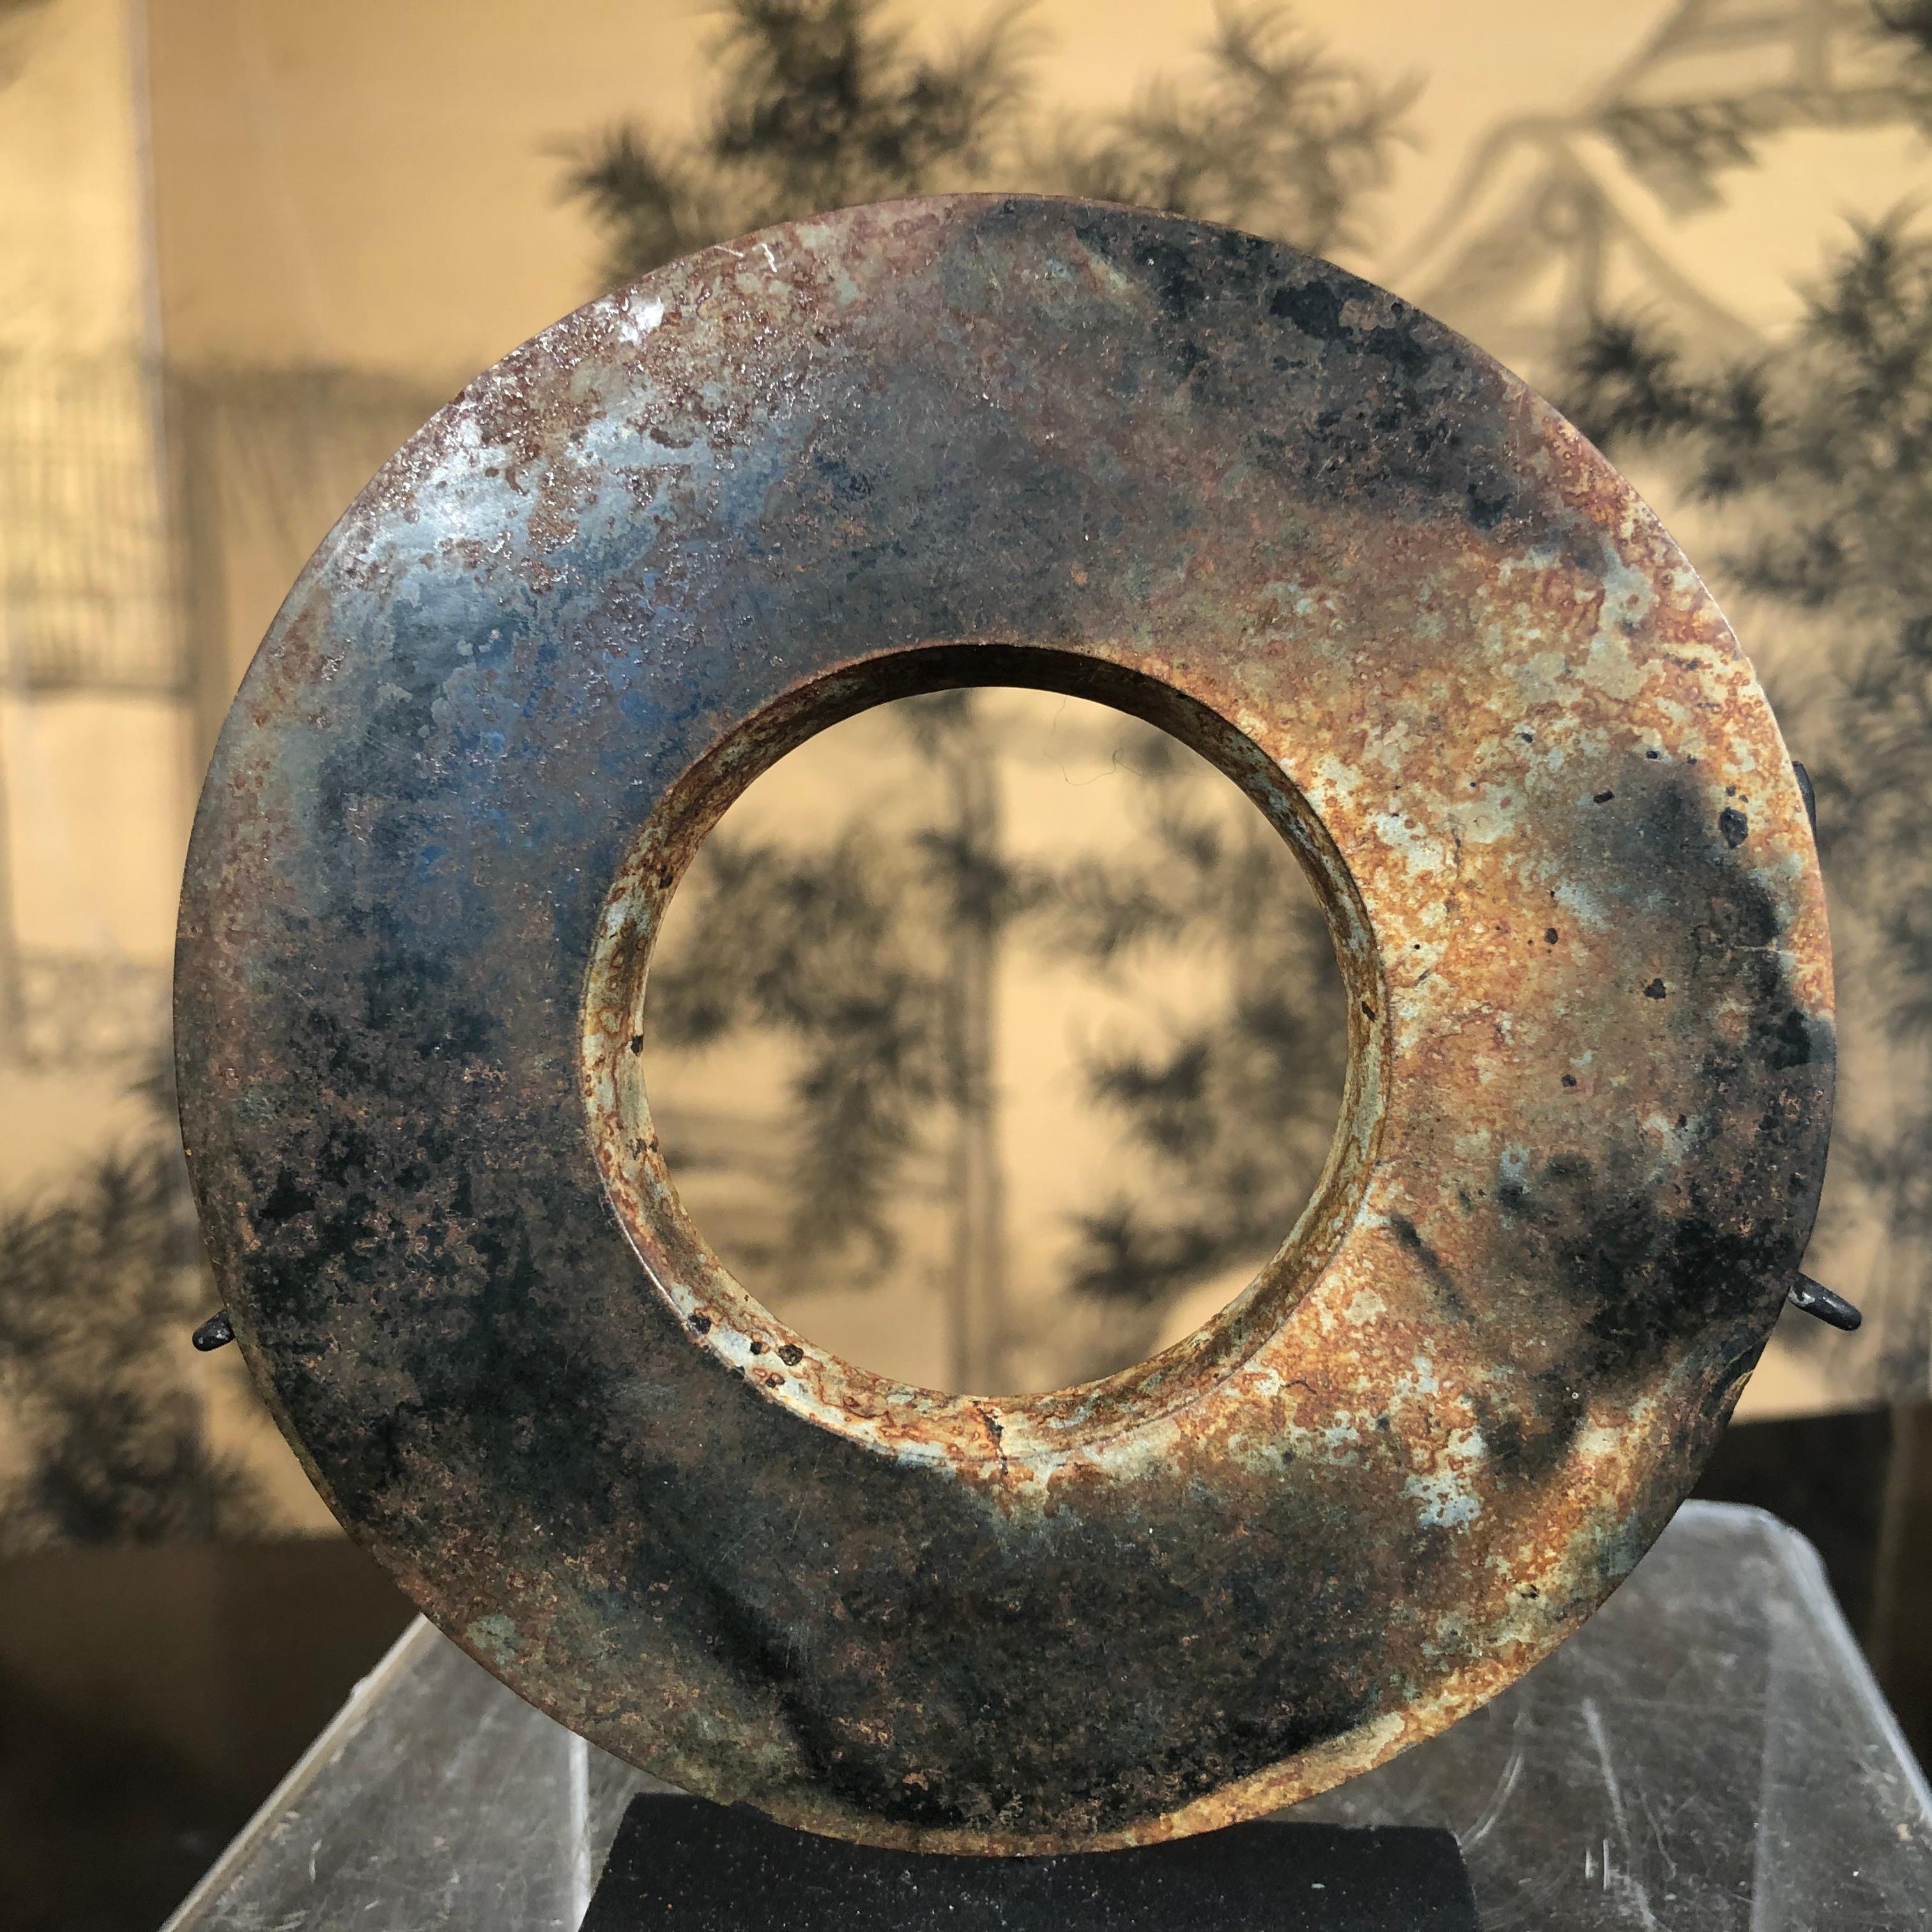 Hand-Carved Important Ancient Chinese Russet Jade Ring Bi Disc, 2000 BCE